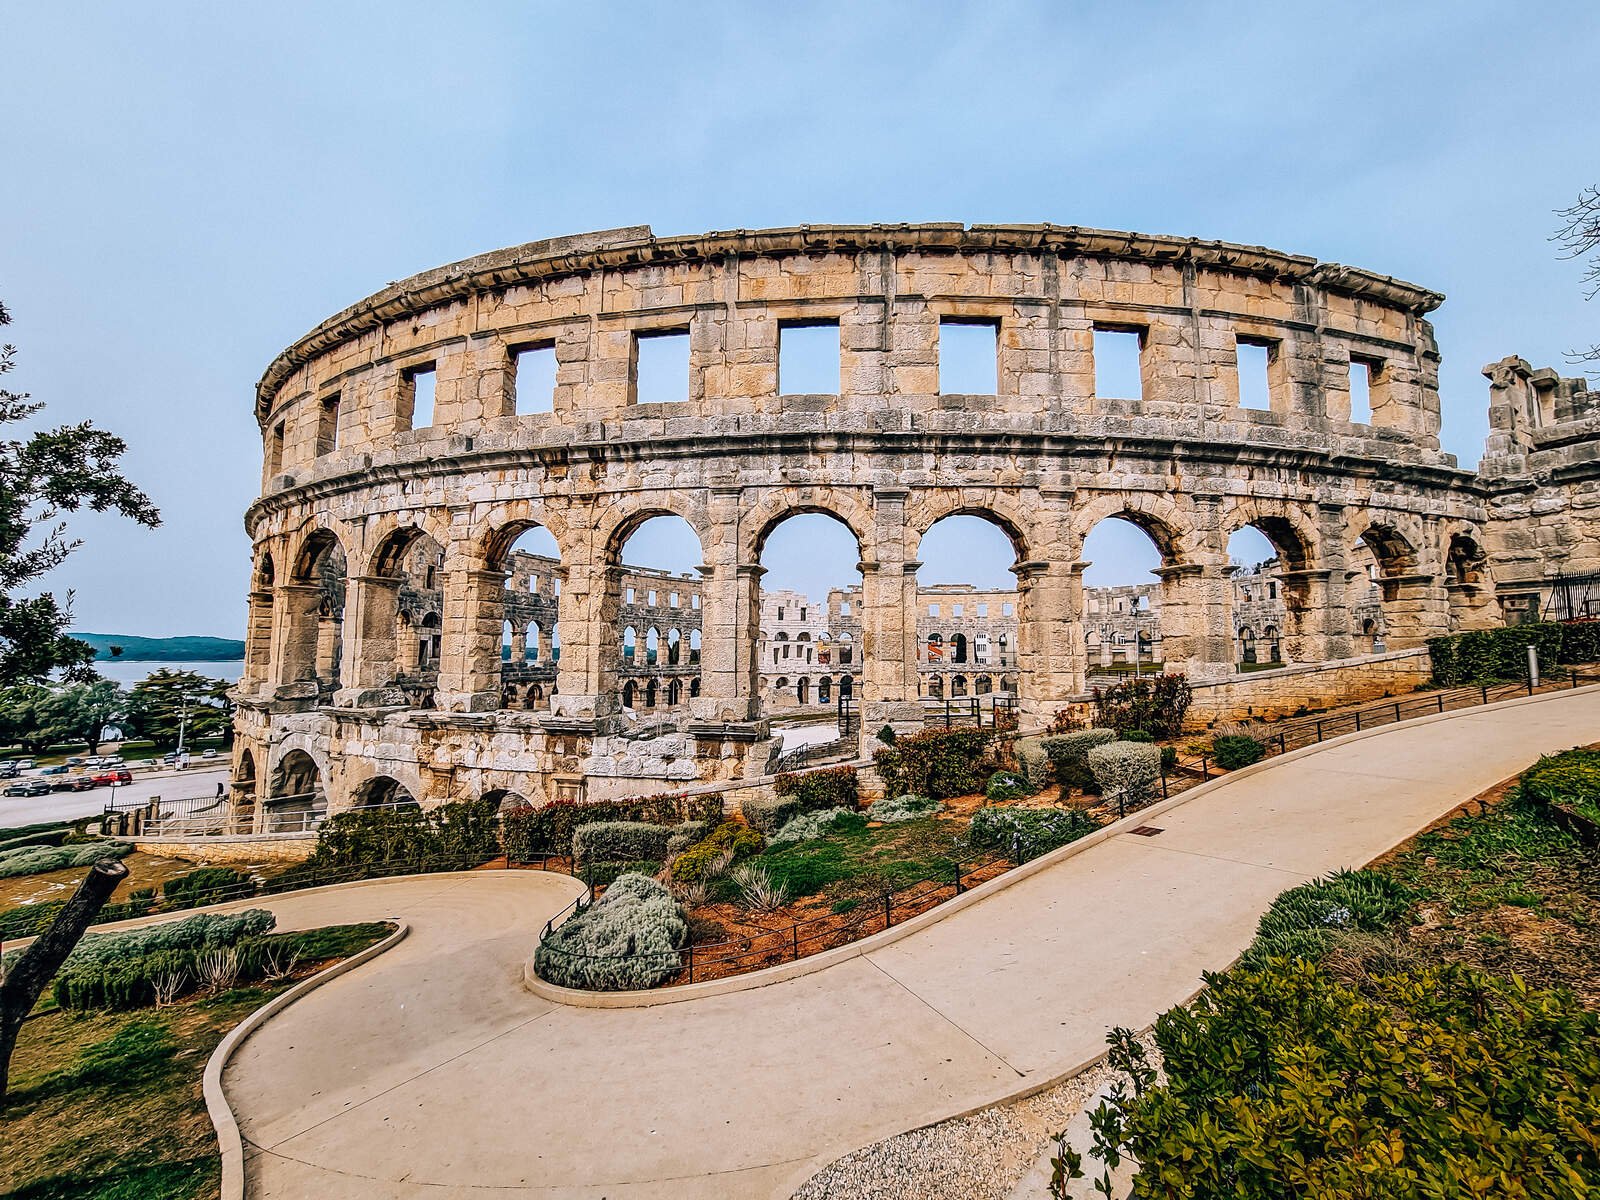 the ancient Pula Arena, one of the best preserved Roman Ampitheatres with stone arches in two tiers